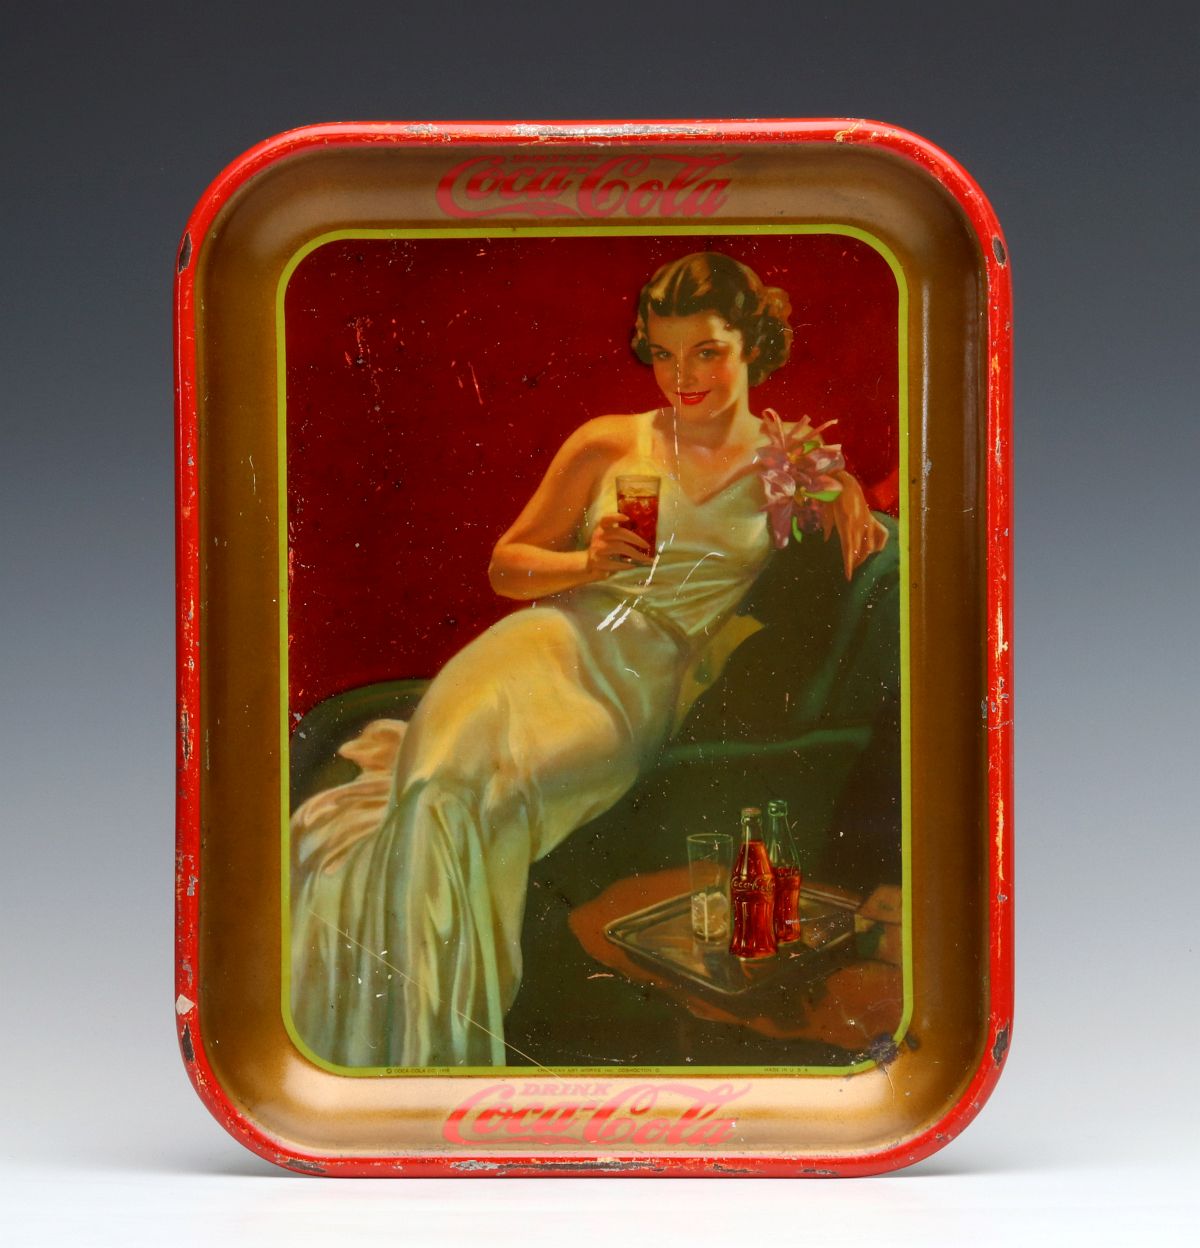 A 1936 COCA-COLA SERVING TRAY WITH WOMAN IN GOWN